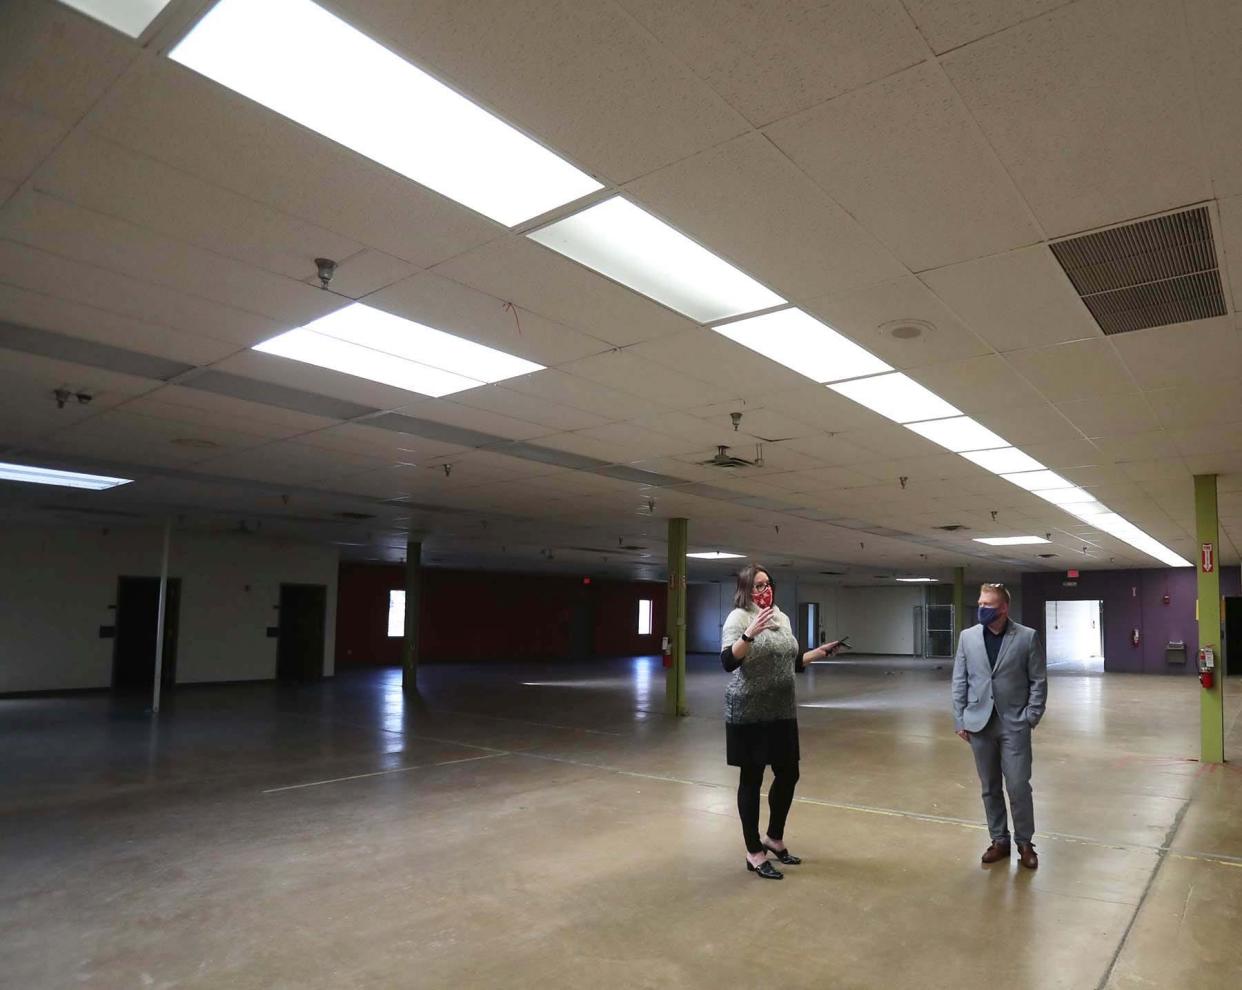 Lori L. Pesci, left, Deputy Director of the Division of Public Safety for the Summit County Executive's Office and Justin Fye, project architect for Mann, Parsons, Gray Architects walk through the former site of the Weaver Workshop that will become the new regional dispatch center.